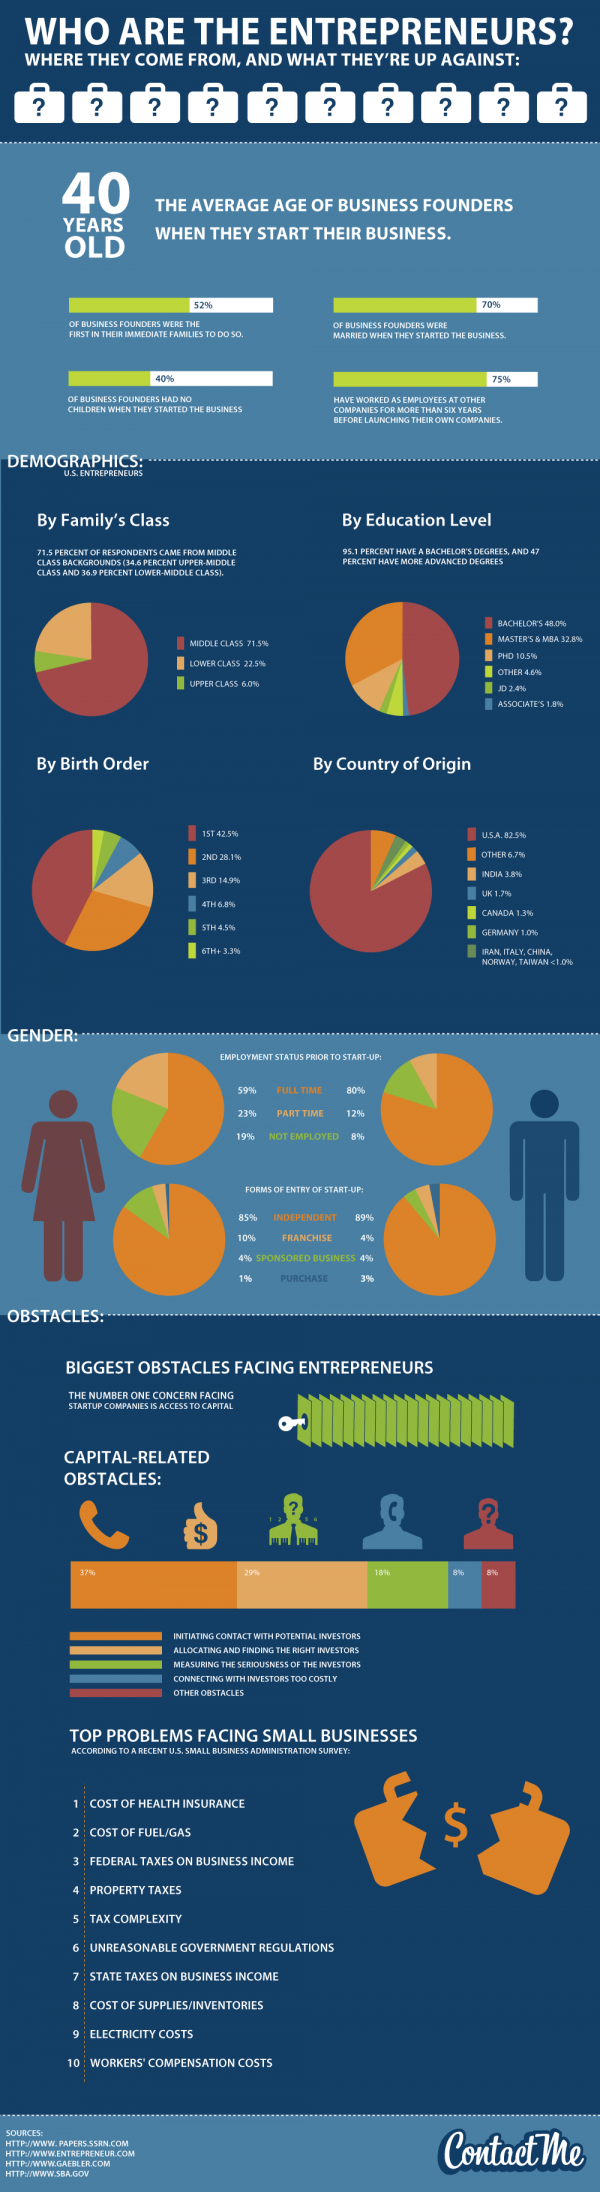 who are entreprenuers